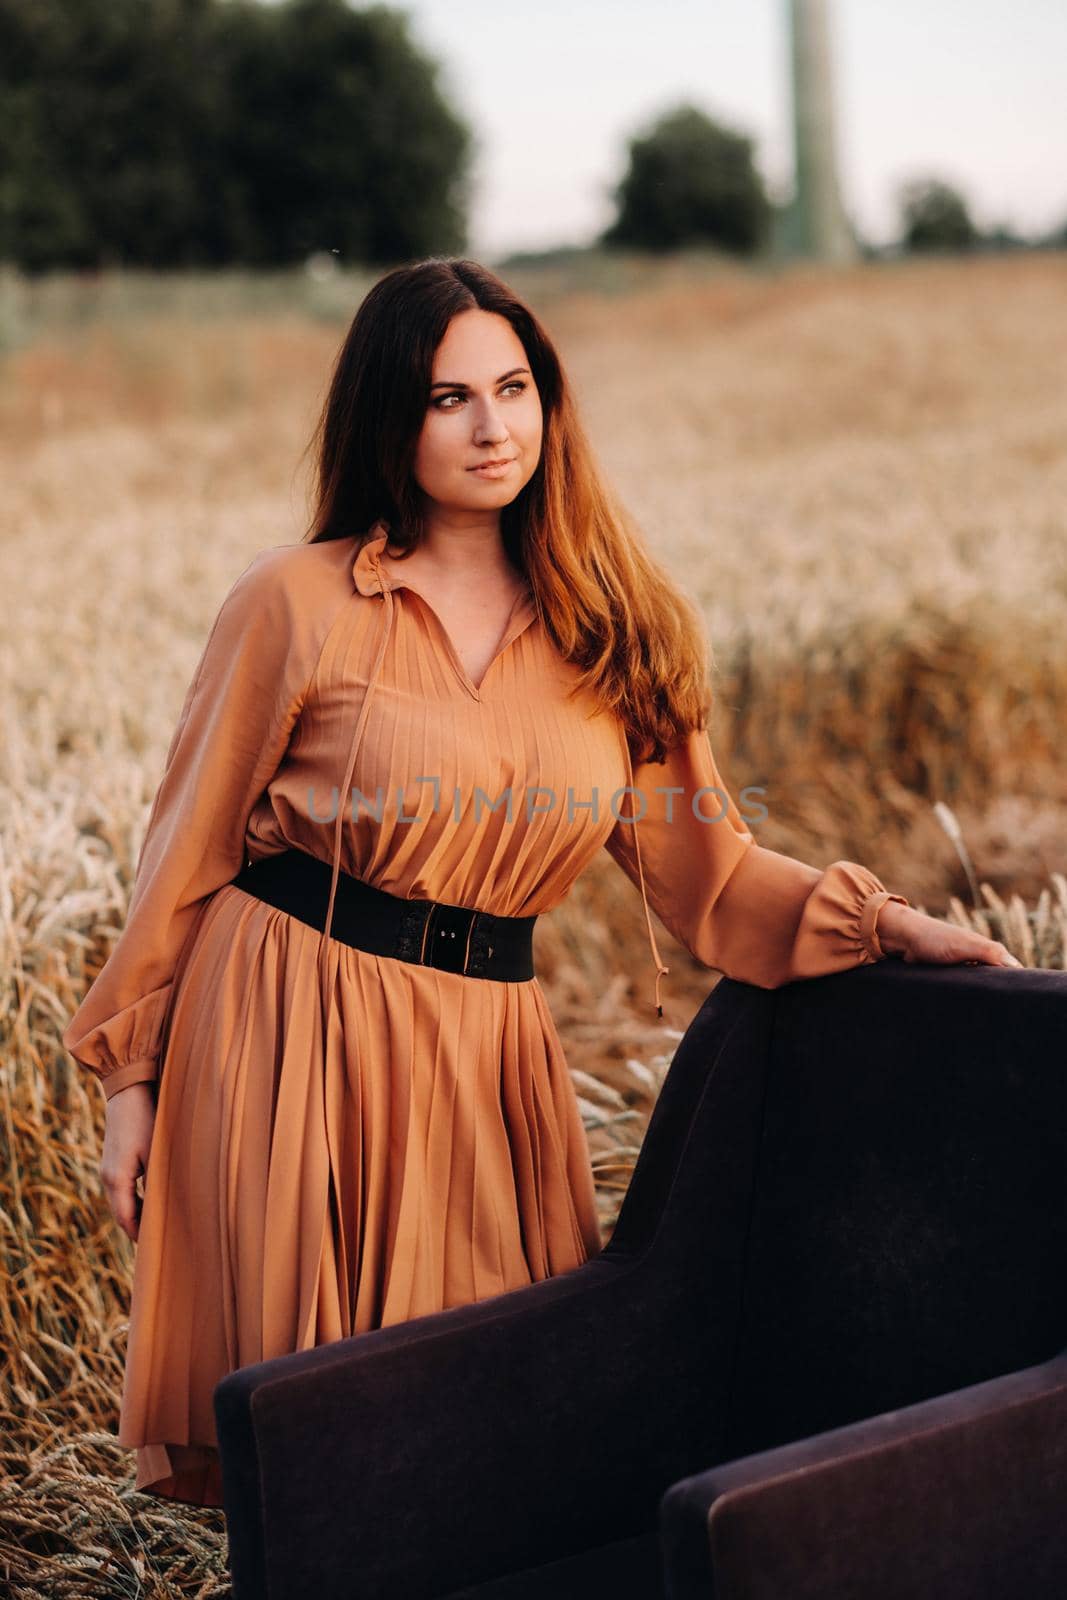 A girl in a orange dress stands next to a chair in a wheat field in the evening by Lobachad